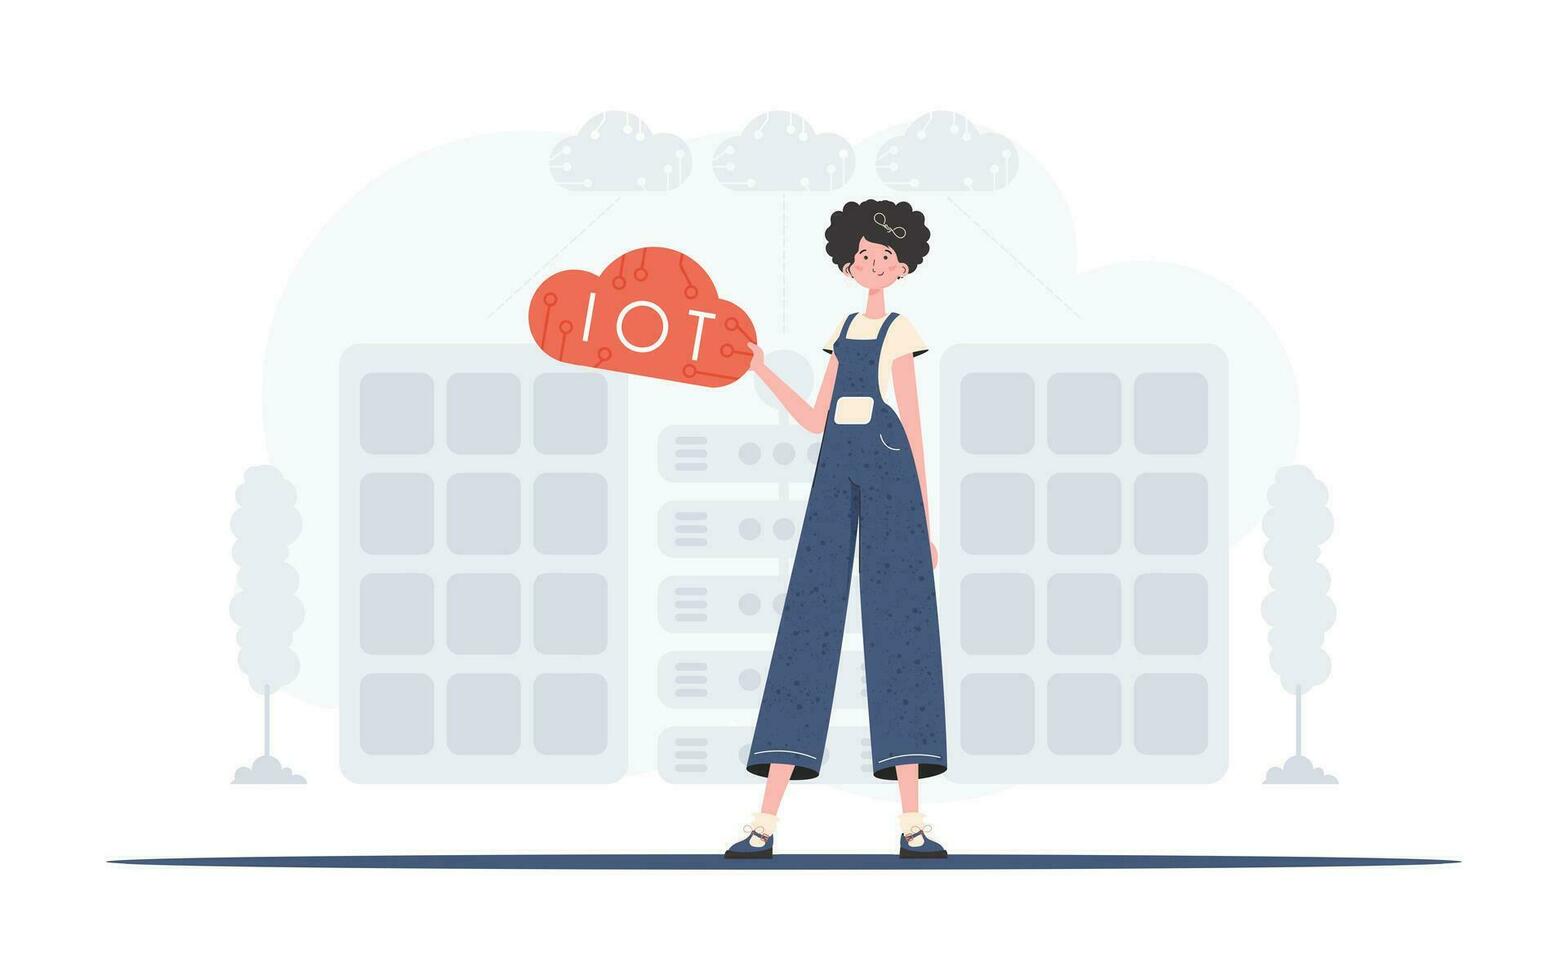 A woman is holding an internet thing icon in her hands. IoT concept. Good for websites and presentations. Vector illustration in flat style.